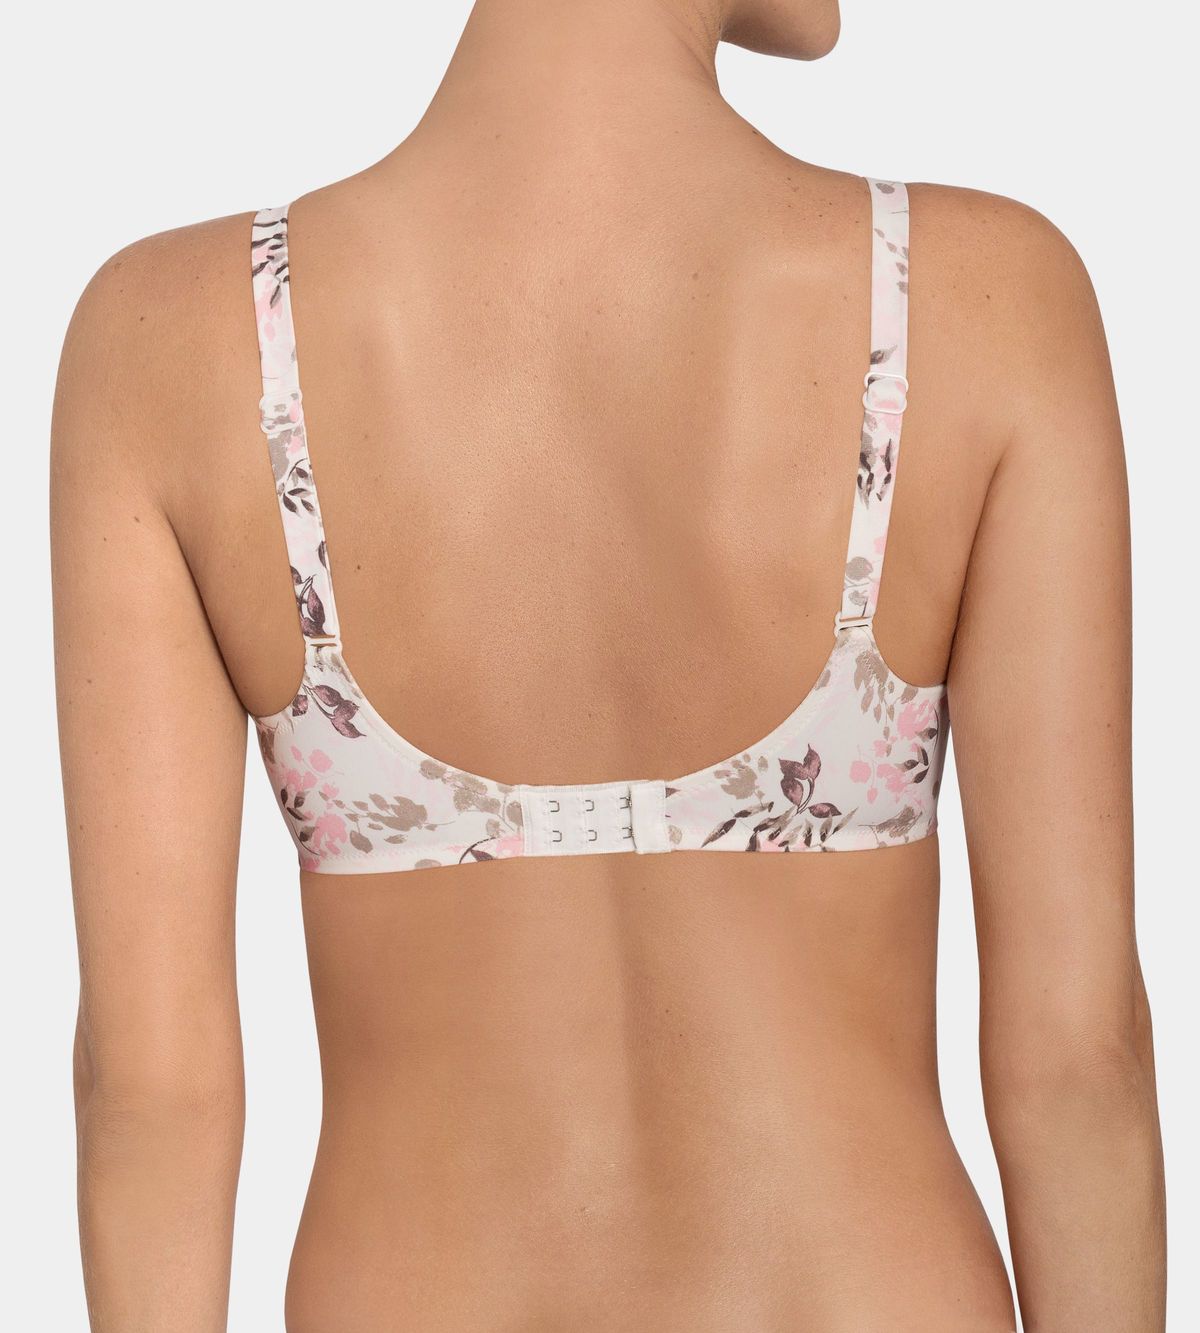 TRIUMPH Contouring Sensation Non Padded Wired Support Minimizer Bra Women  Minimizer Non Padded Bra - Buy TRIUMPH Contouring Sensation Non Padded  Wired Support Minimizer Bra Women Minimizer Non Padded Bra Online at